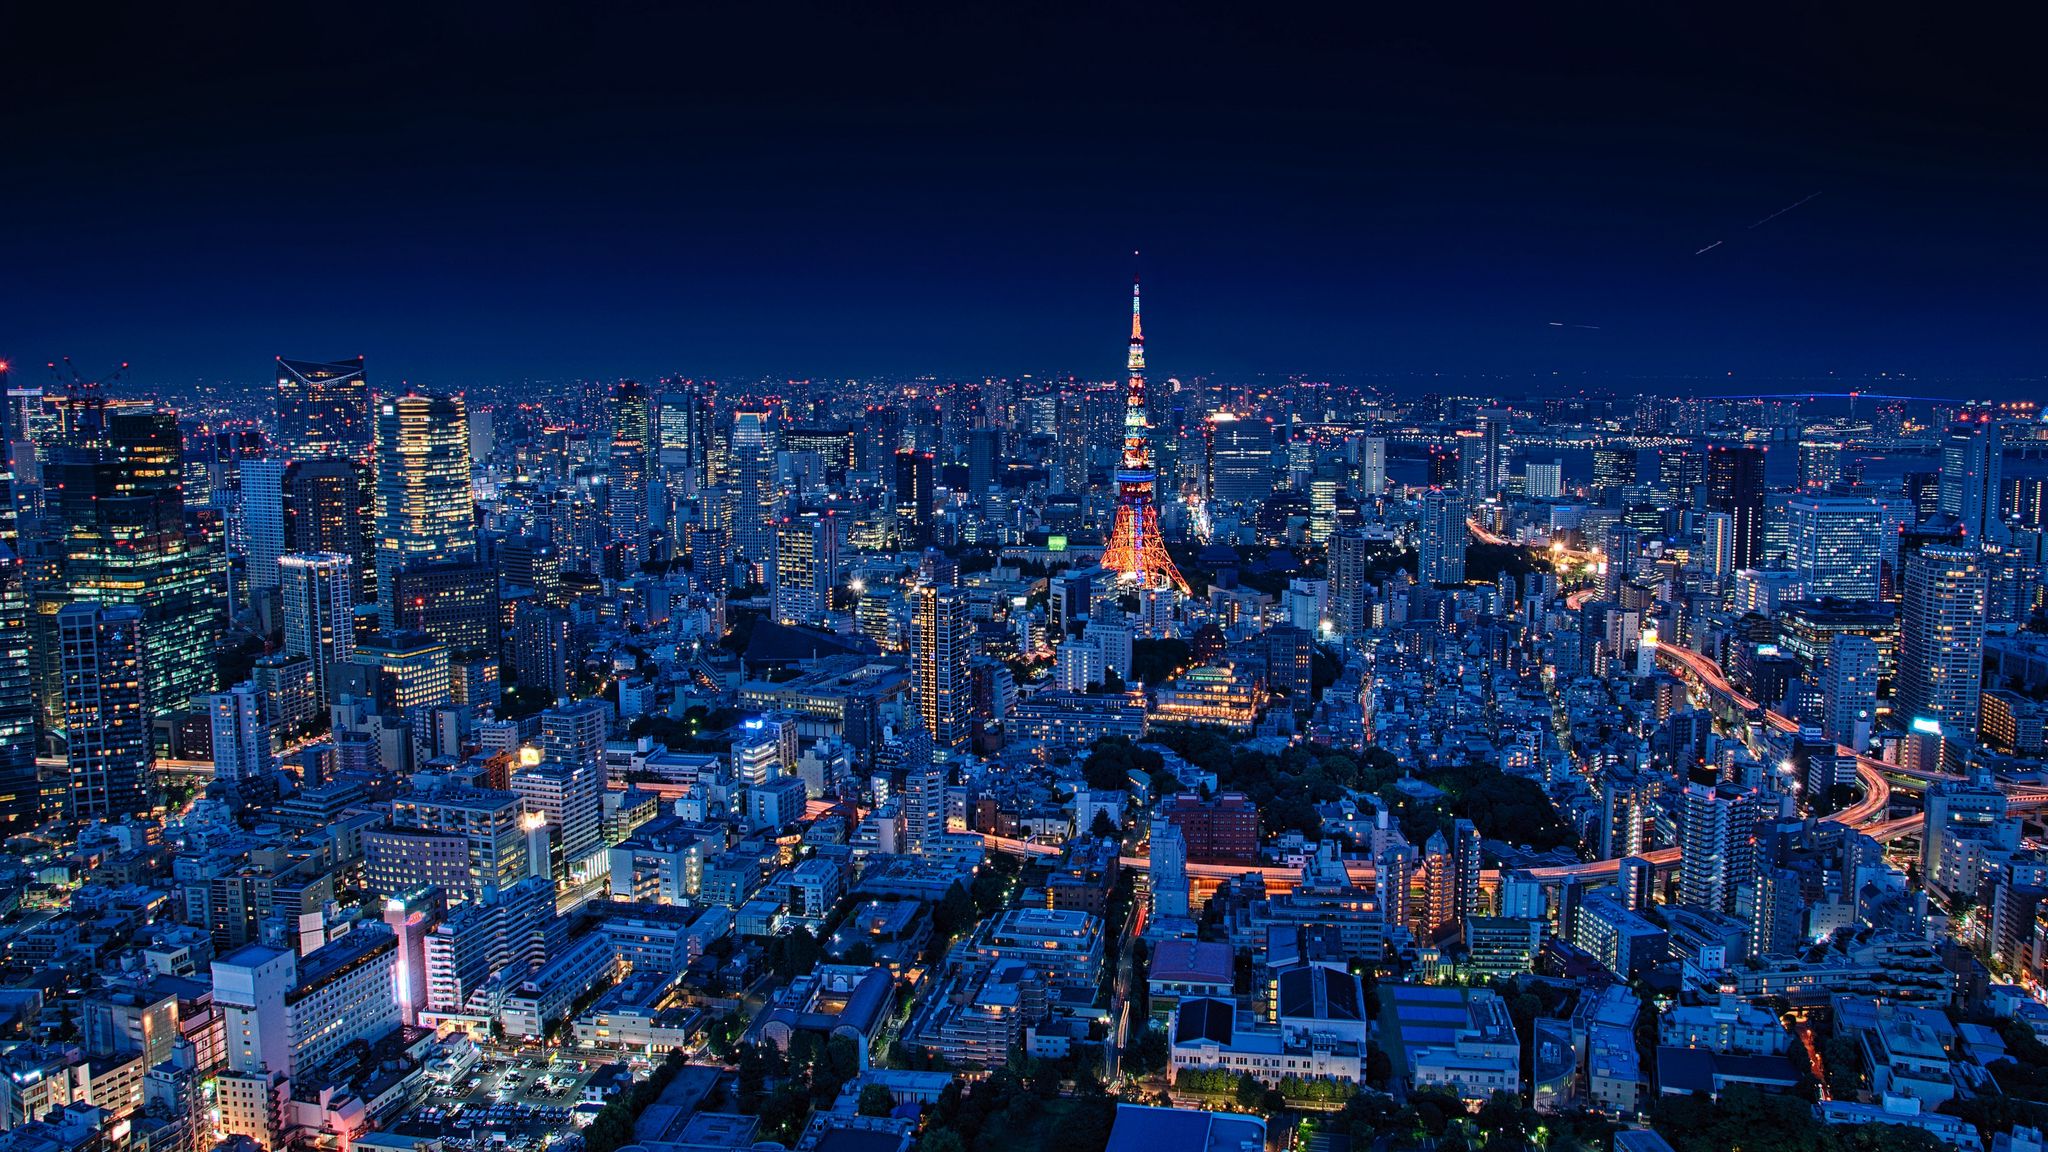 Download wallpaper 2048x1152 night city, aerial view, buildings ...